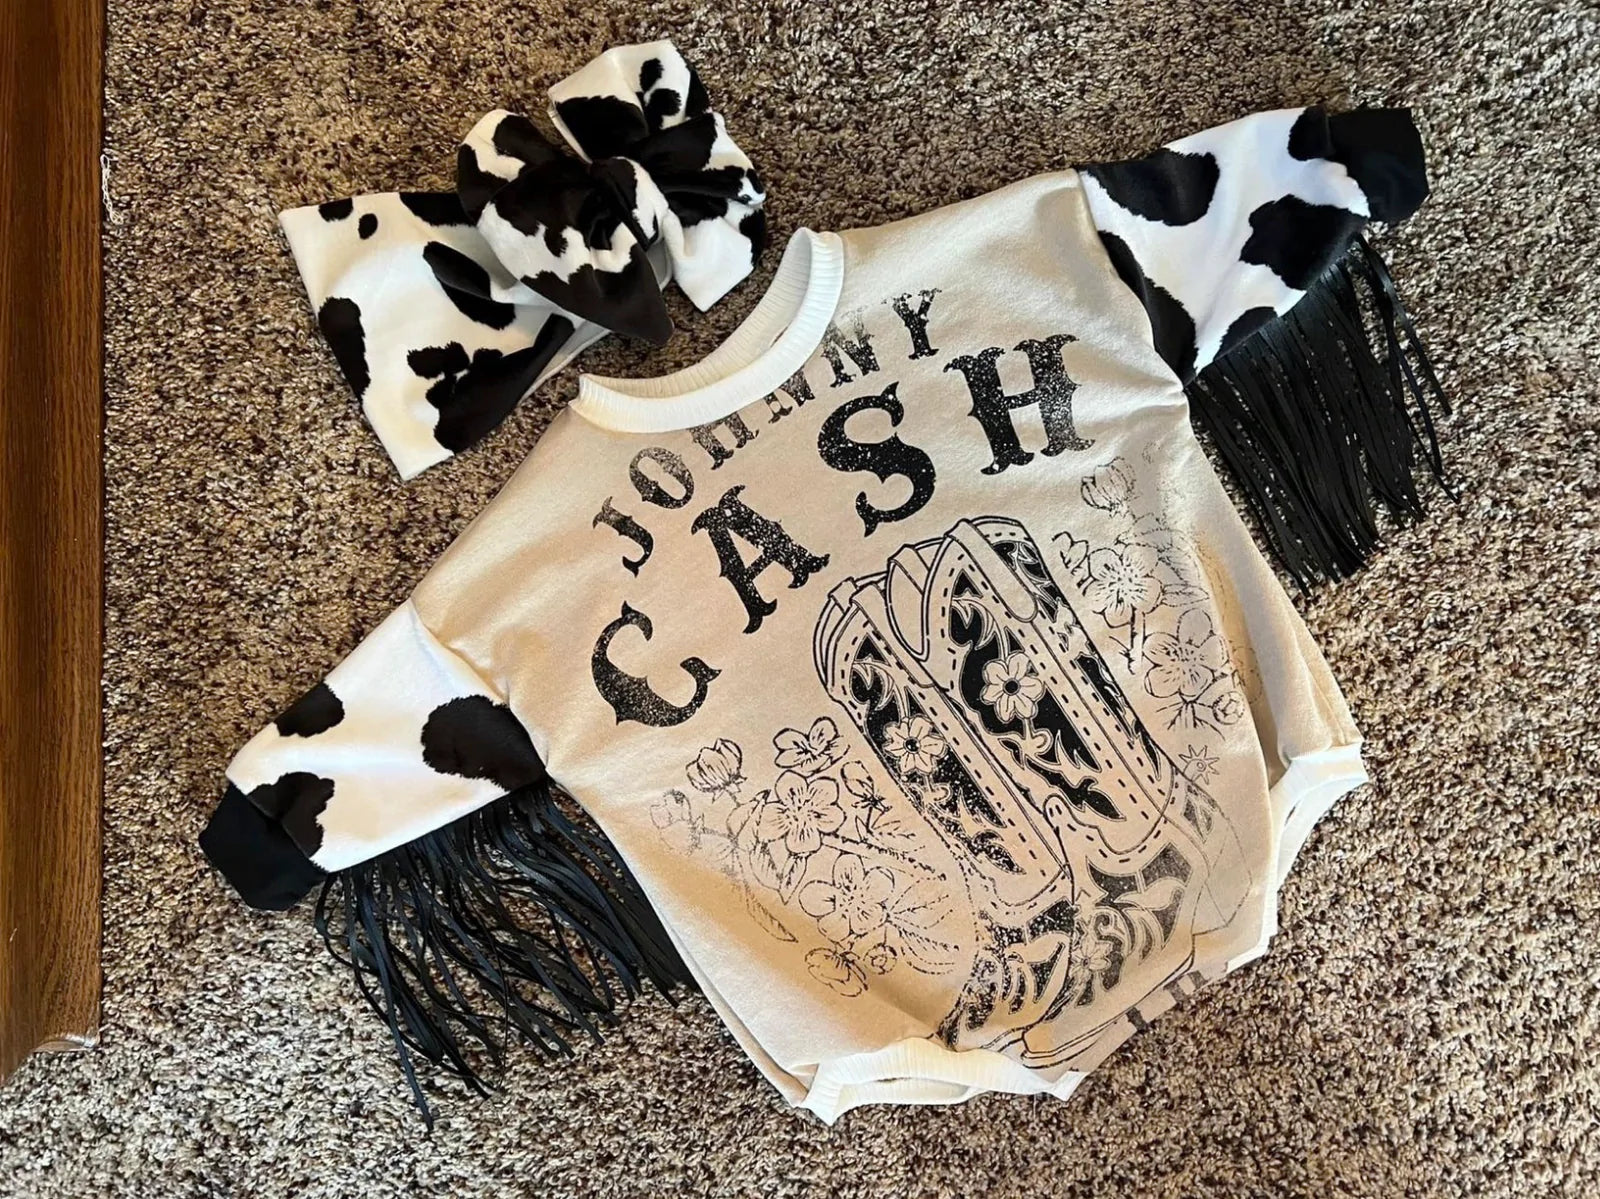 Baby Johnny Cash Romper + Bow